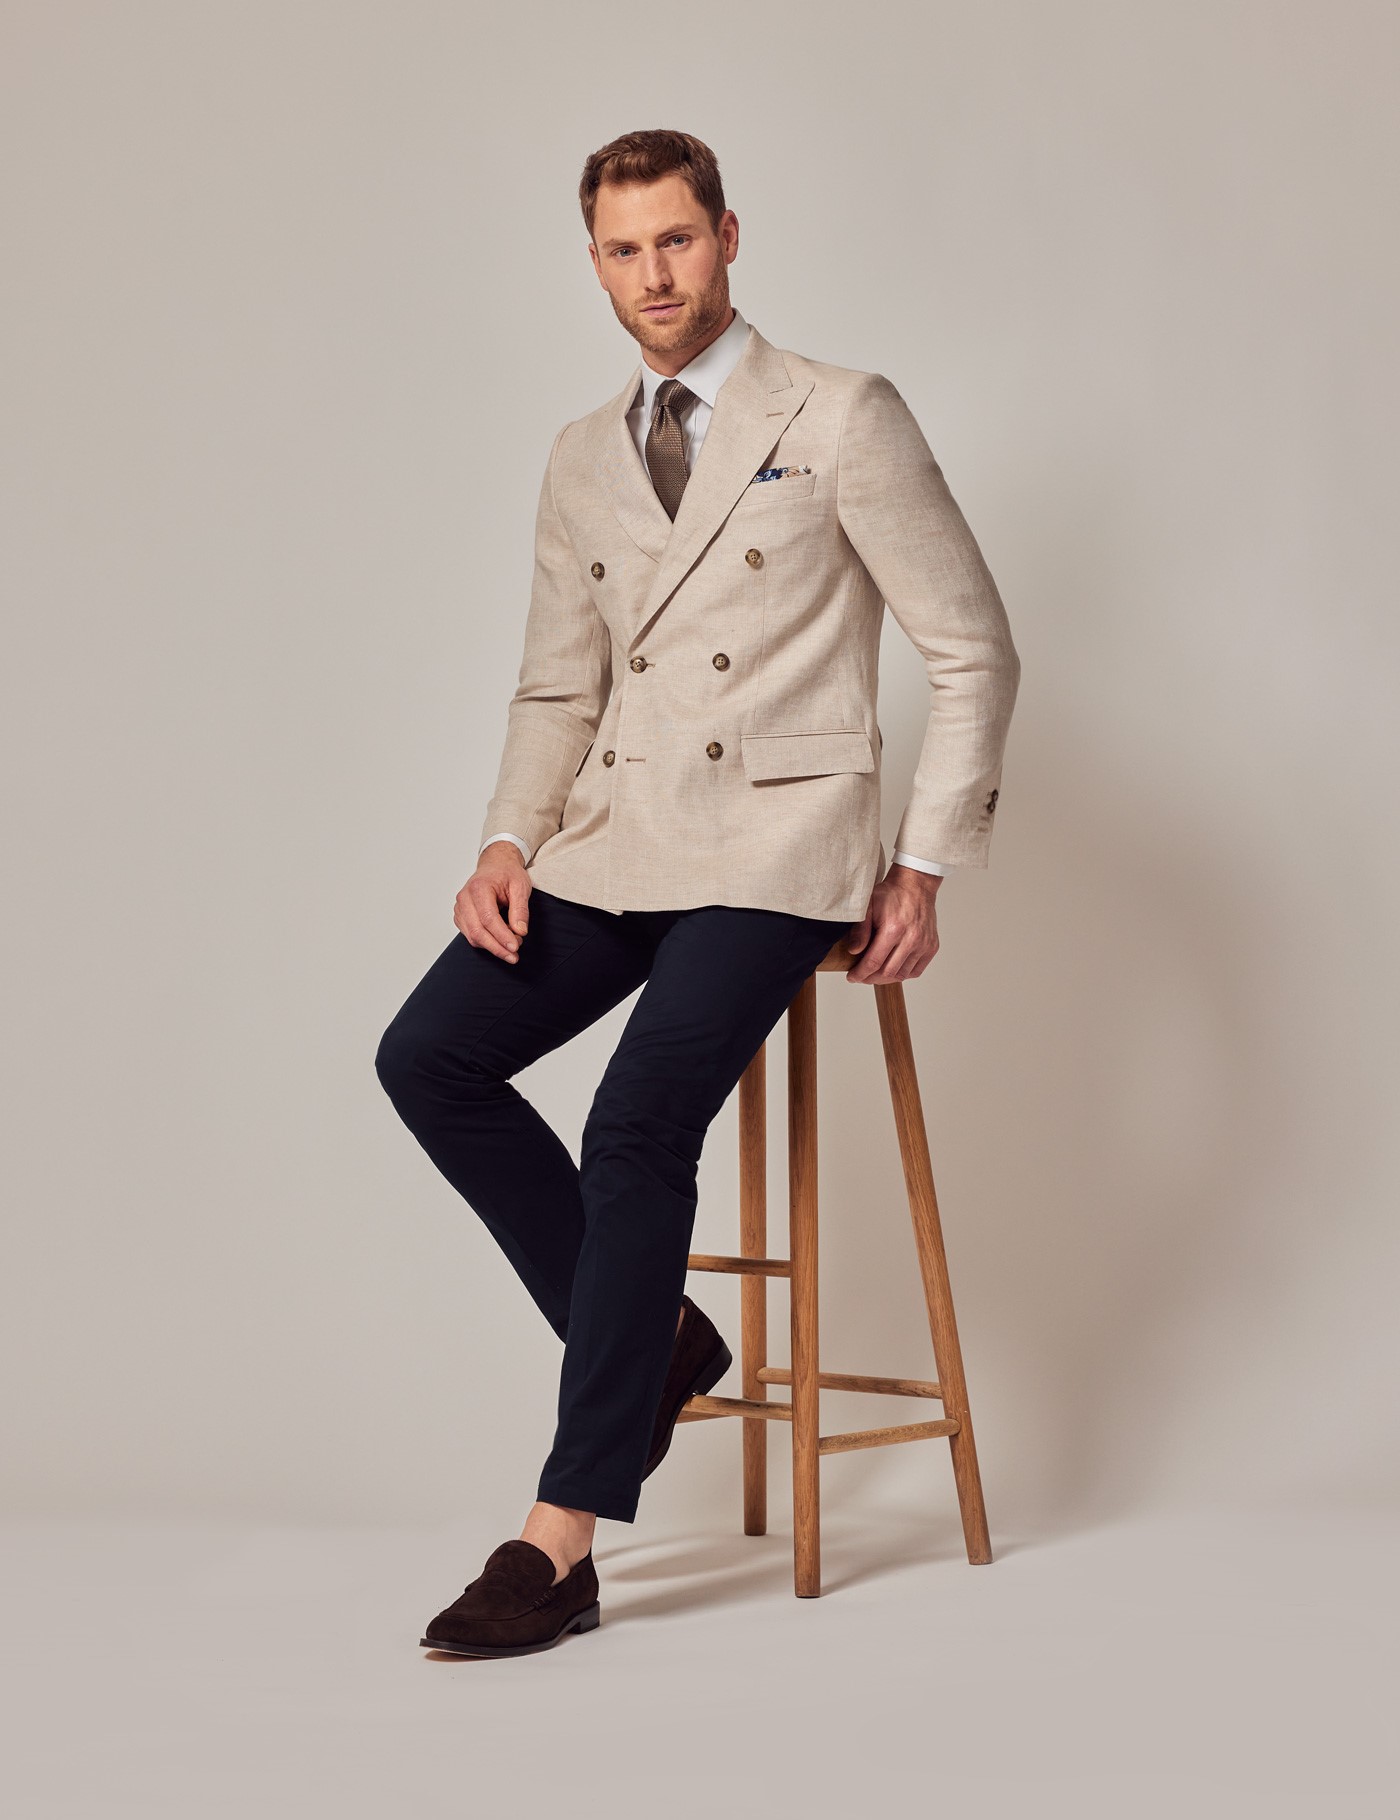 Men's Cream Double Breasted Linen Tailored Suit Jacket